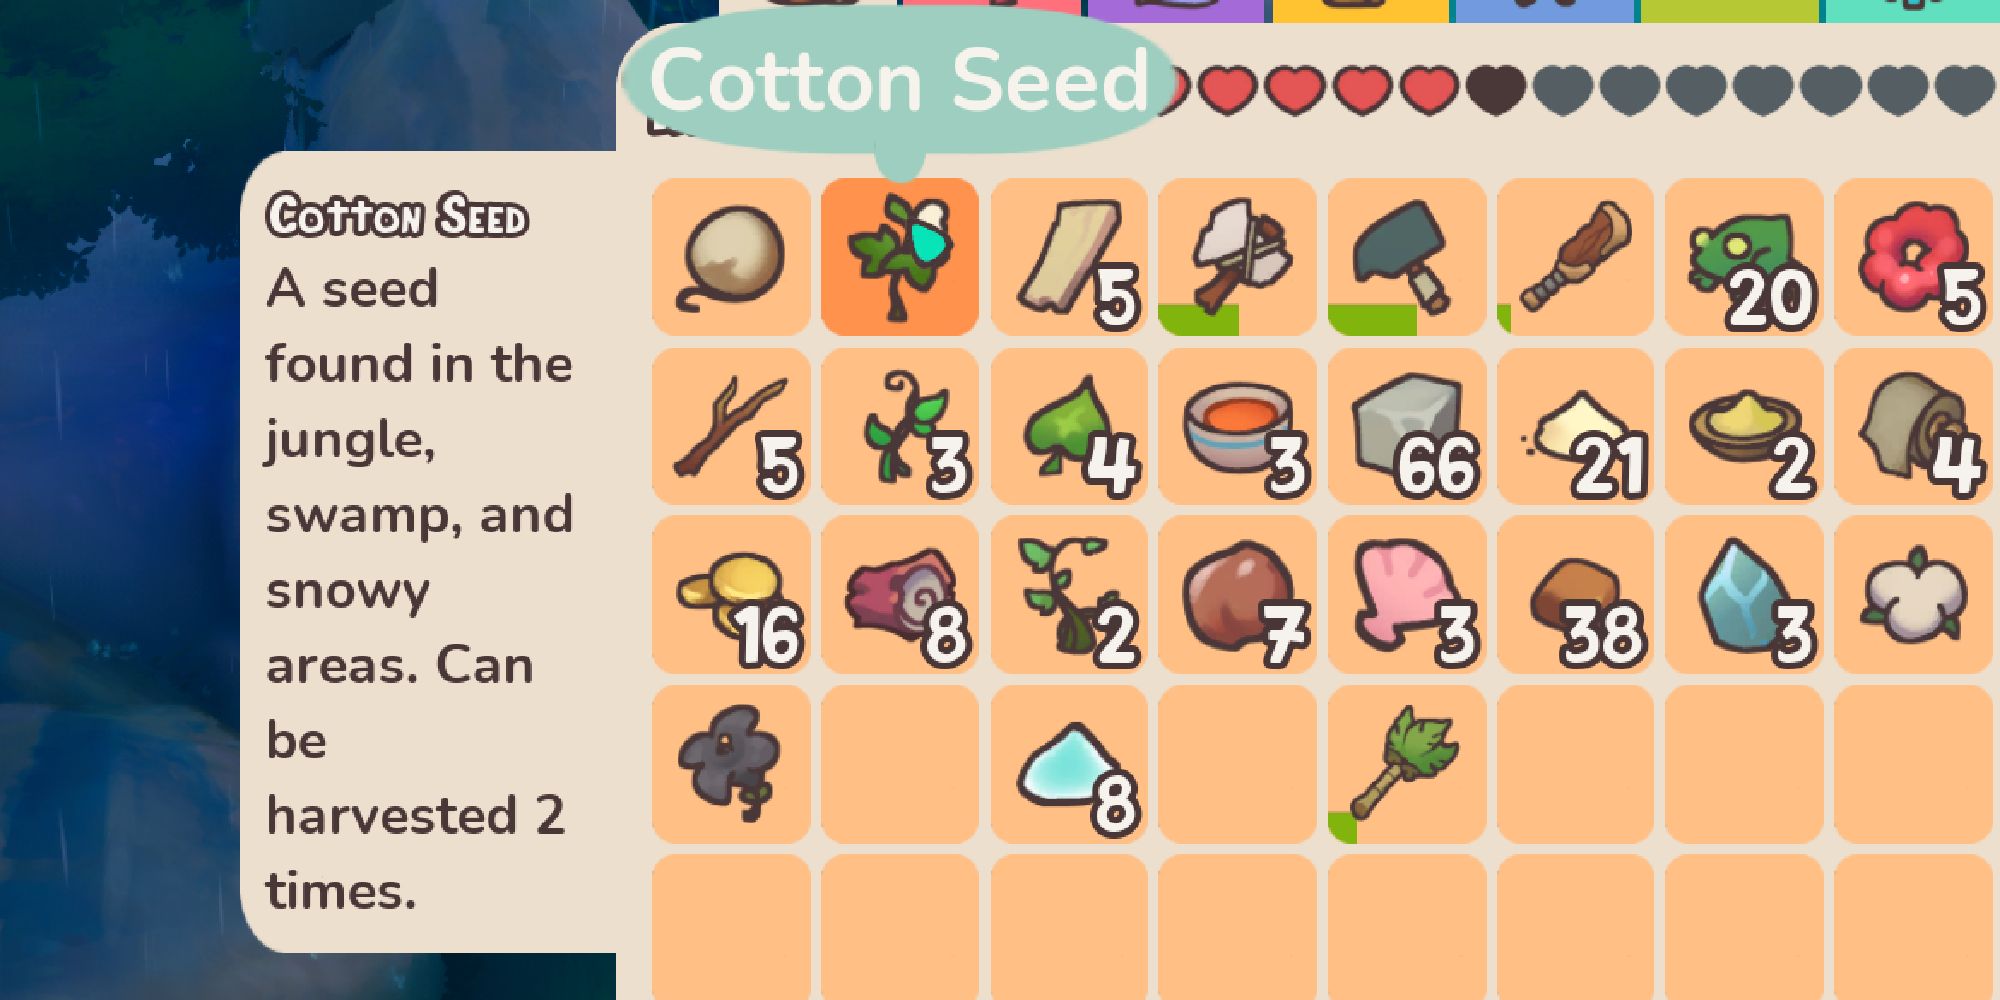 cotton seed description in inventory